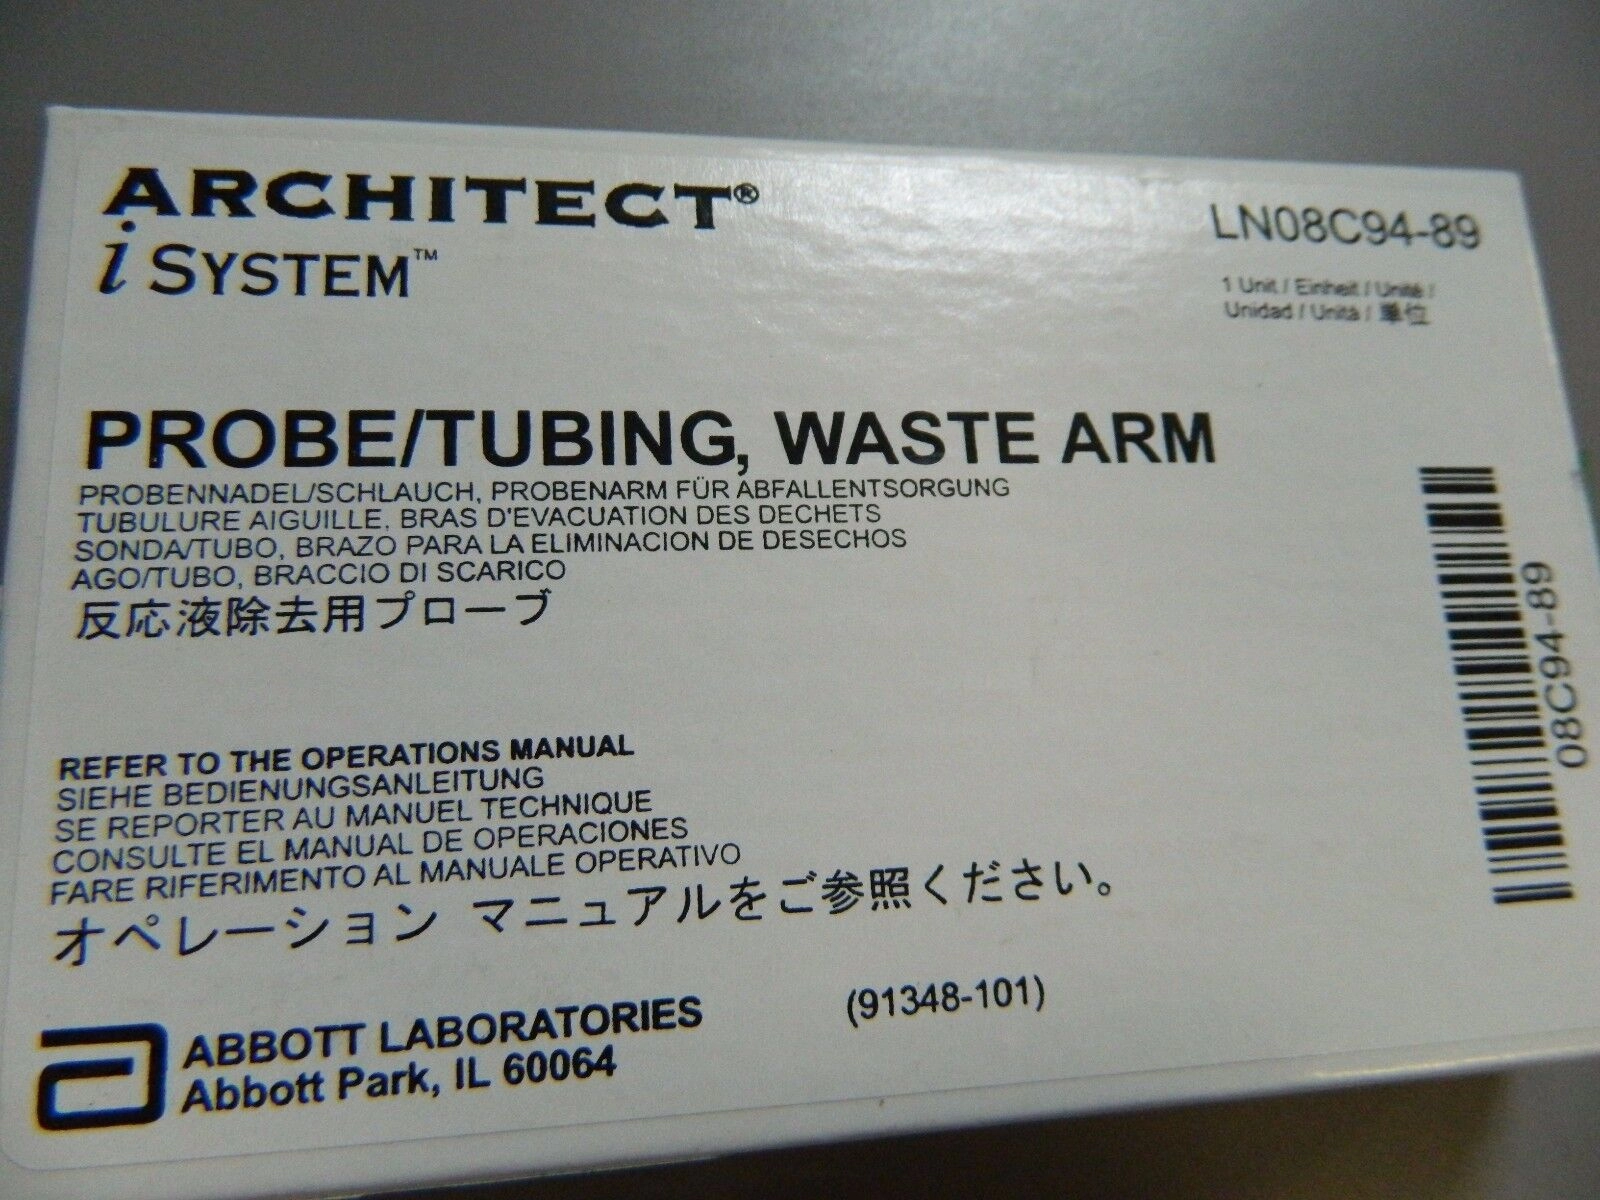 PROBE,TUBING, WASTE ARM P/N 08C94-89 FOR ARCHITECT